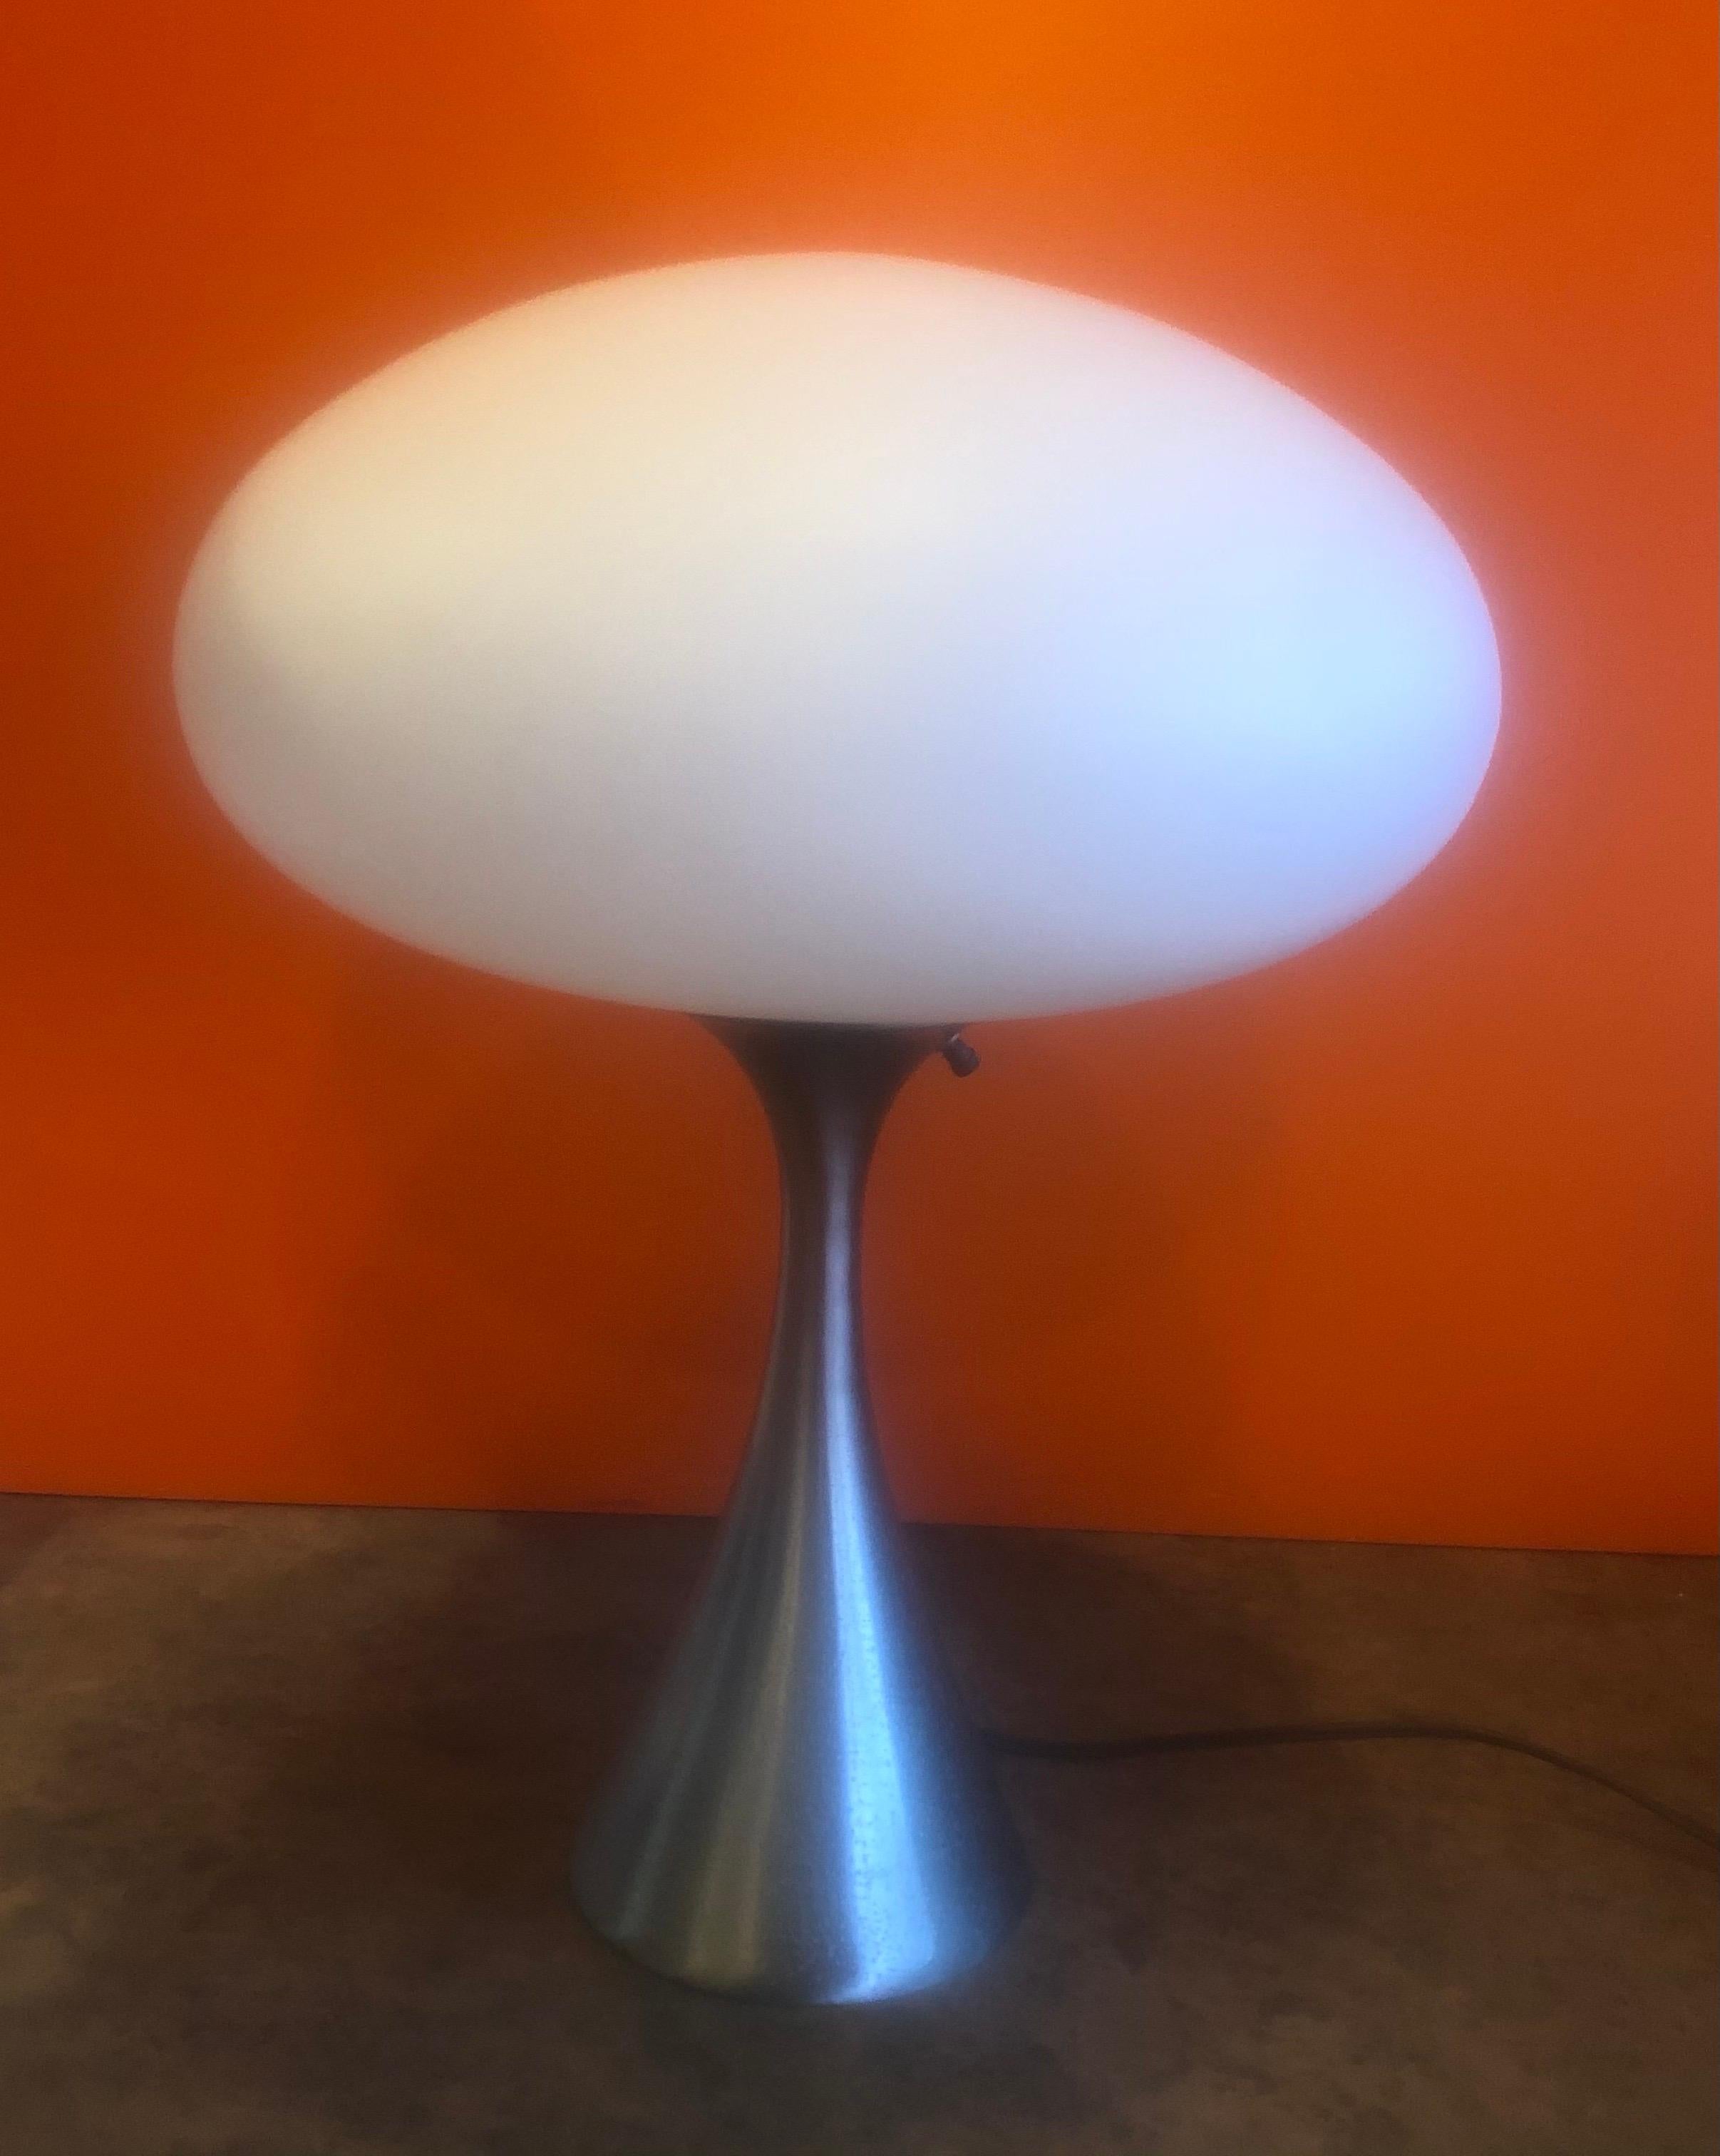 Stylistic mushroom lamp with brushed aluminum base and matte glass shade by Laurel Lamp Company, circa 1950s. The base has a brushed aluminum finish that has been polished and the frosted lampshade is made of blown glass from Italy. Classic MCM